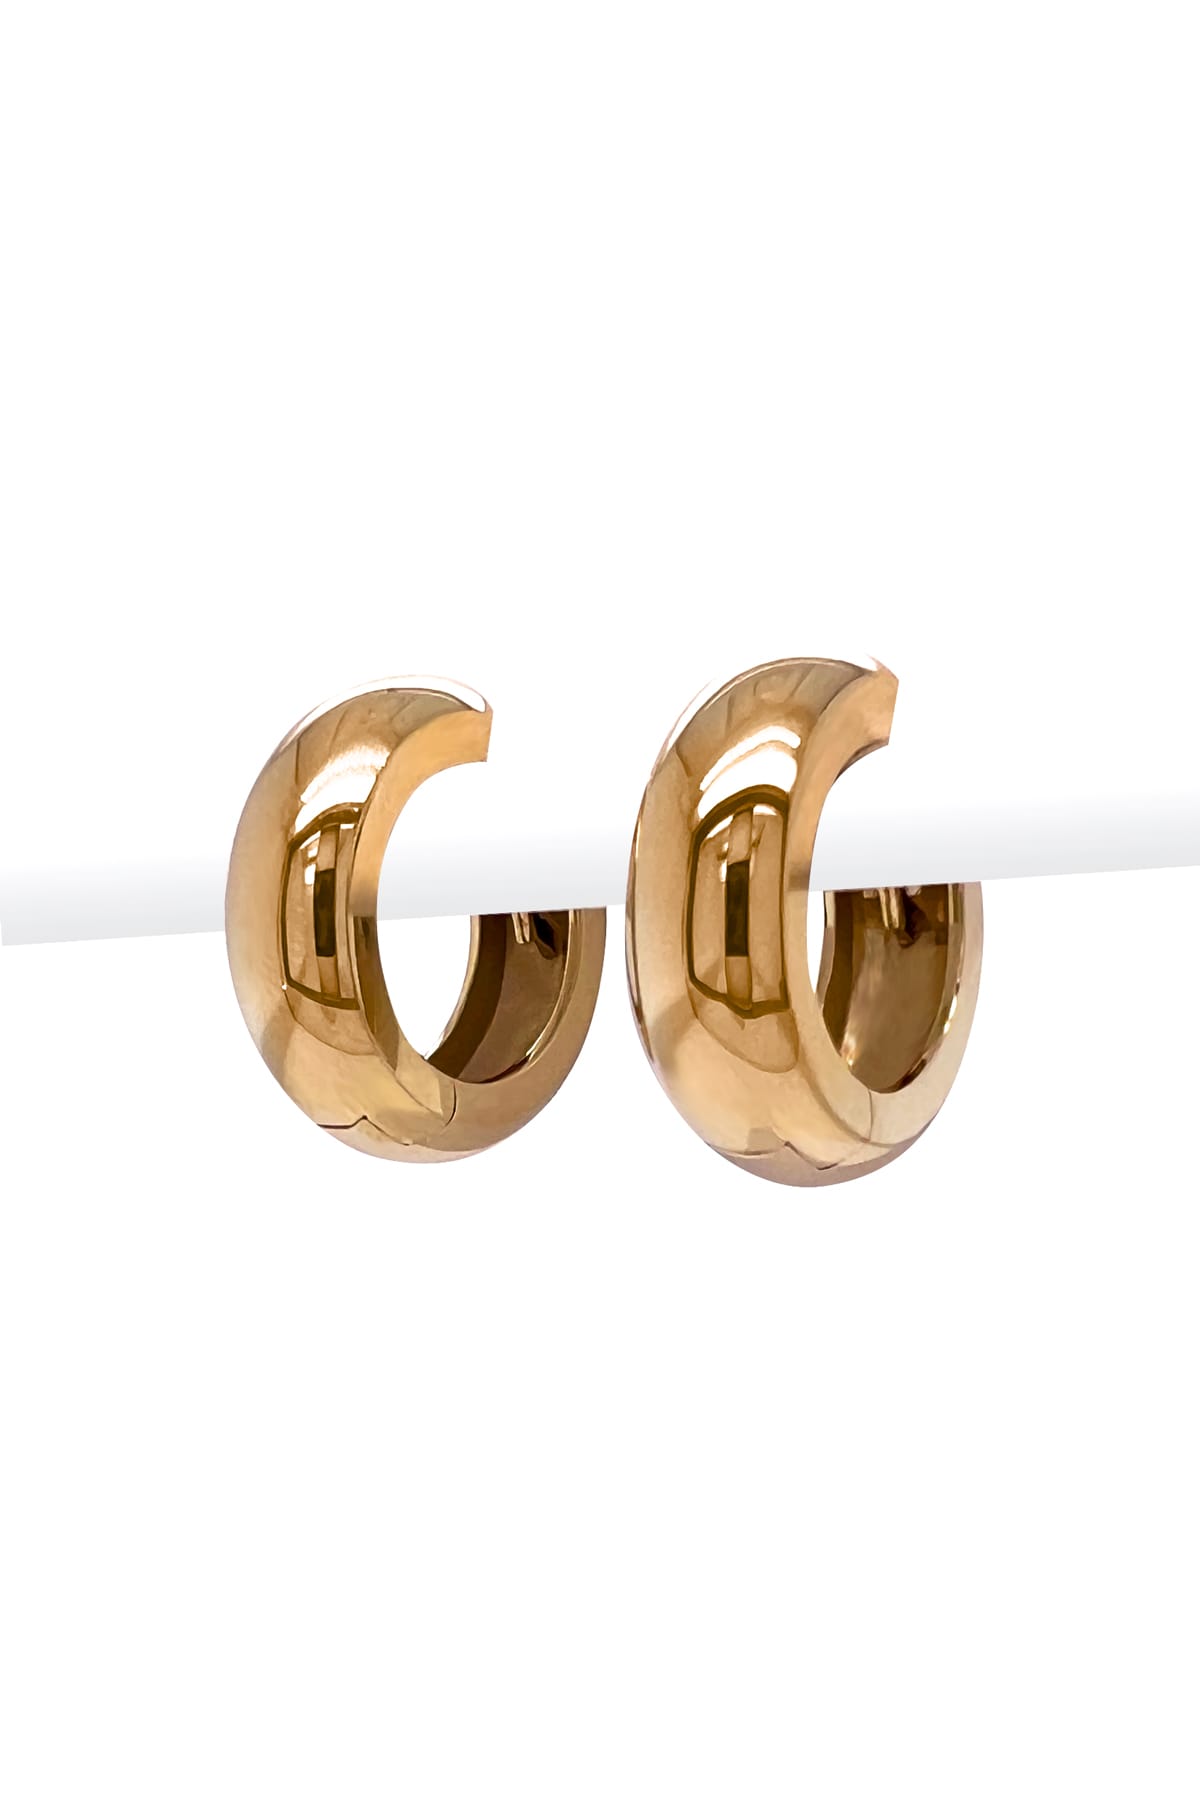 9ct Yellow Gold Plain Huggie Earrings available at LeGassick Diamonds and Jewellery Gold Coast, Australia.